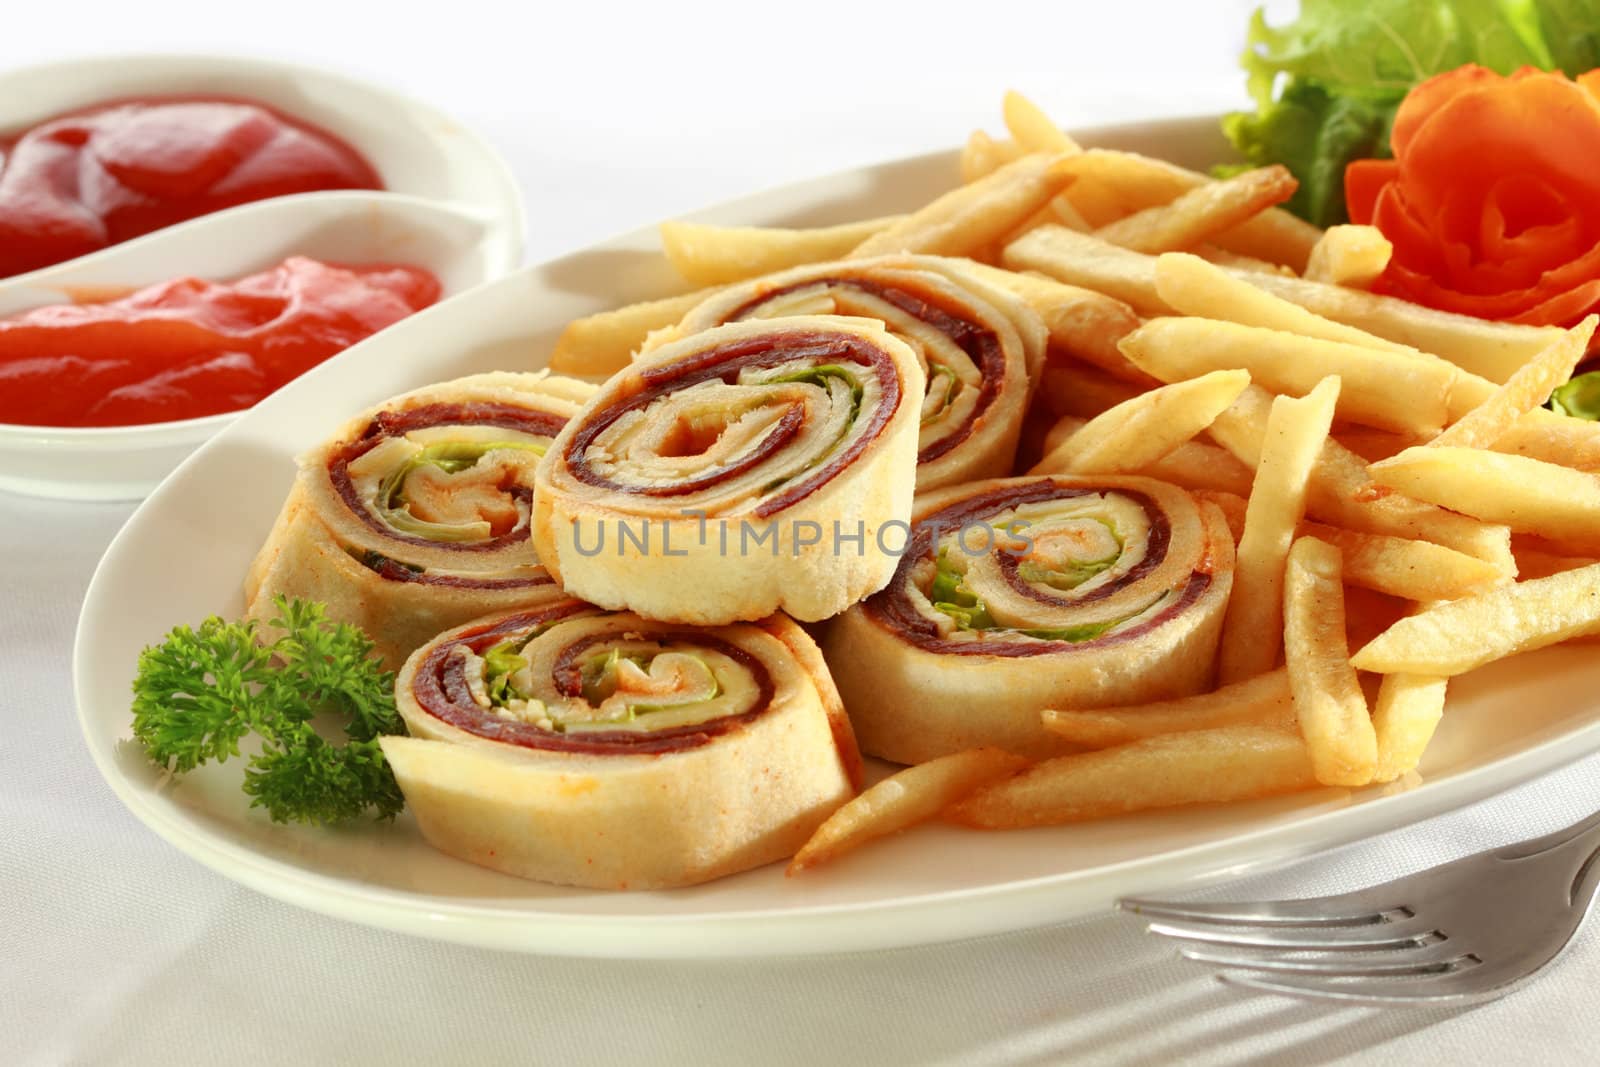 Spiral Sandwich Appetizers with french fries